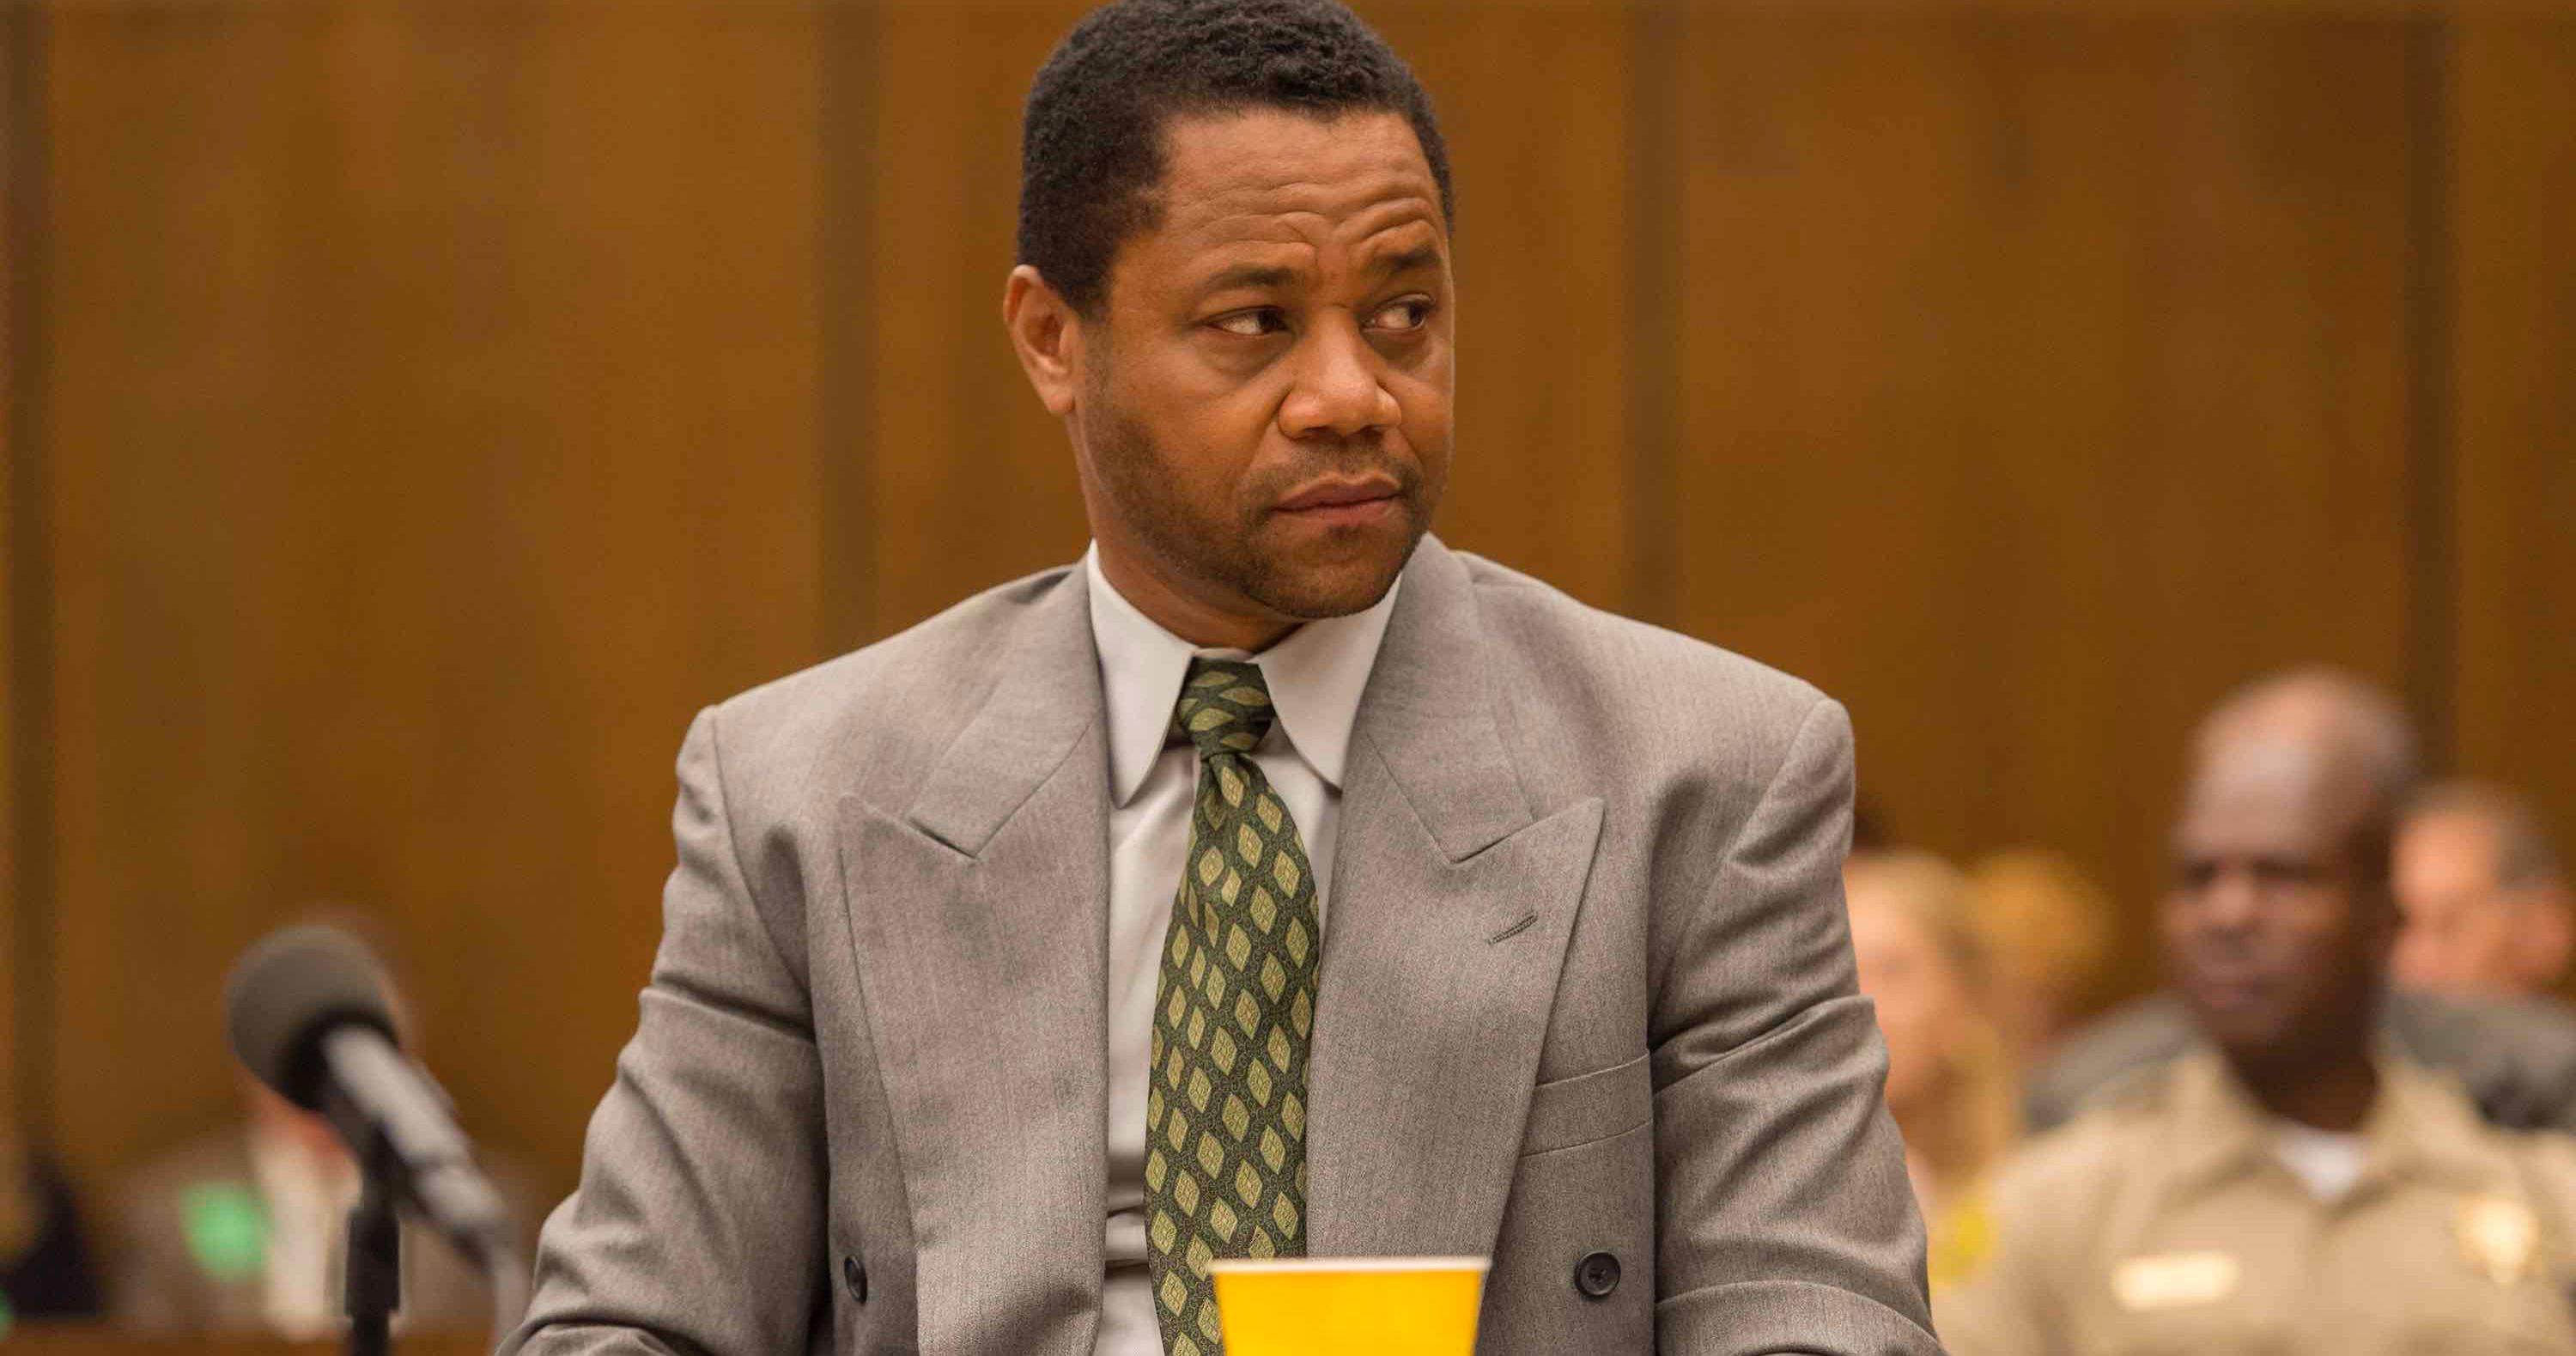 Cuba Gooding Jr. Accused of Raping a Woman in 2013